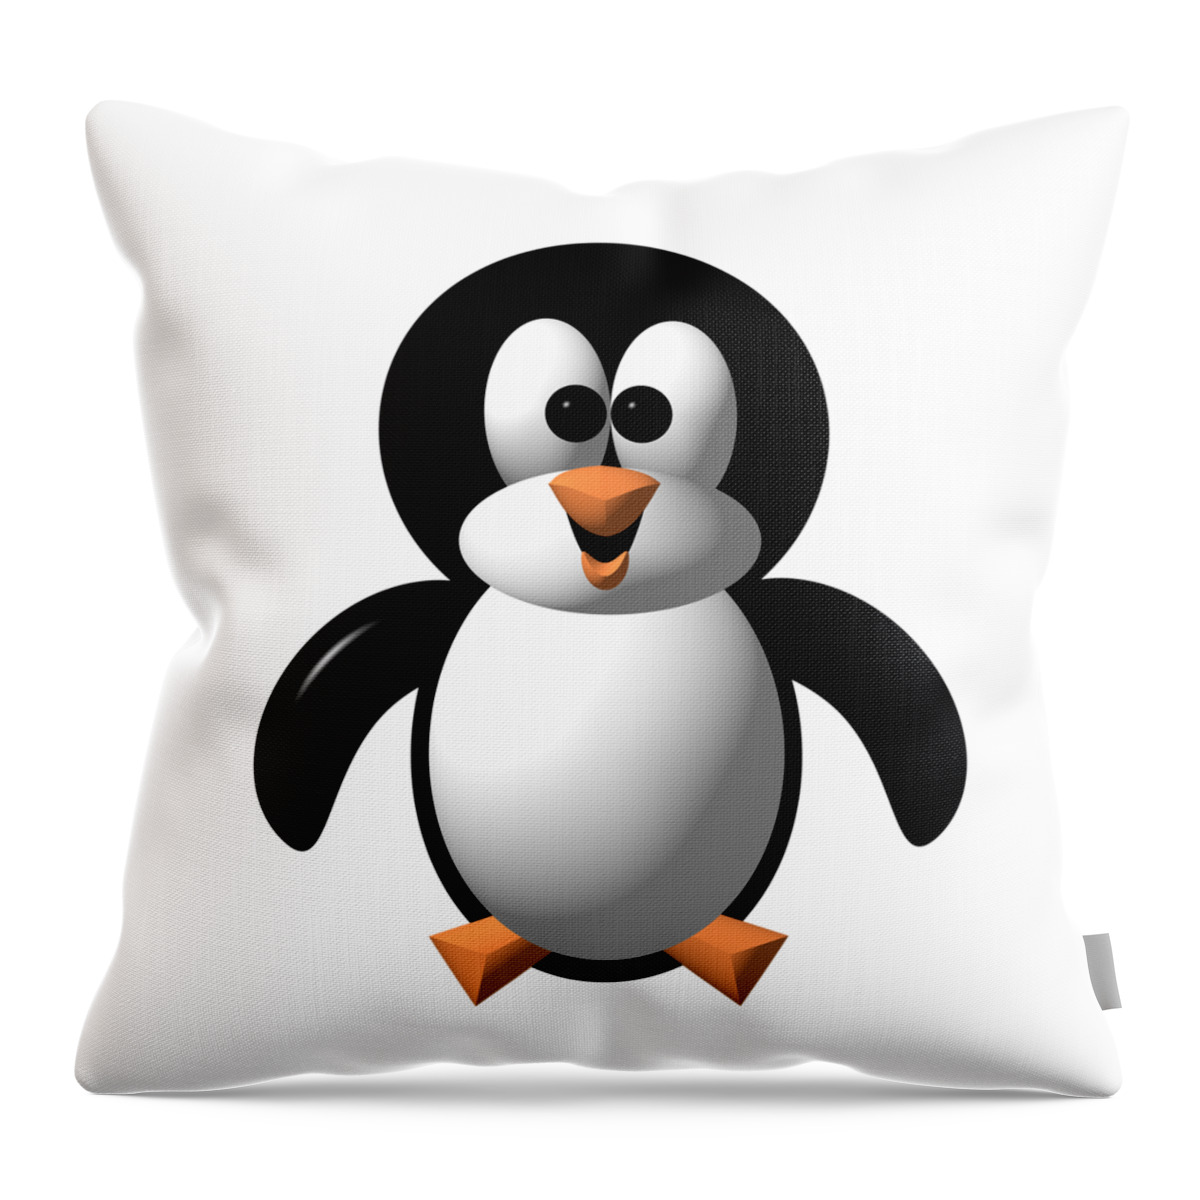 Cute Pengie The Penguin Throw Pillow featuring the digital art Cute Pengie The Penguin by Rose Santuci-Sofranko